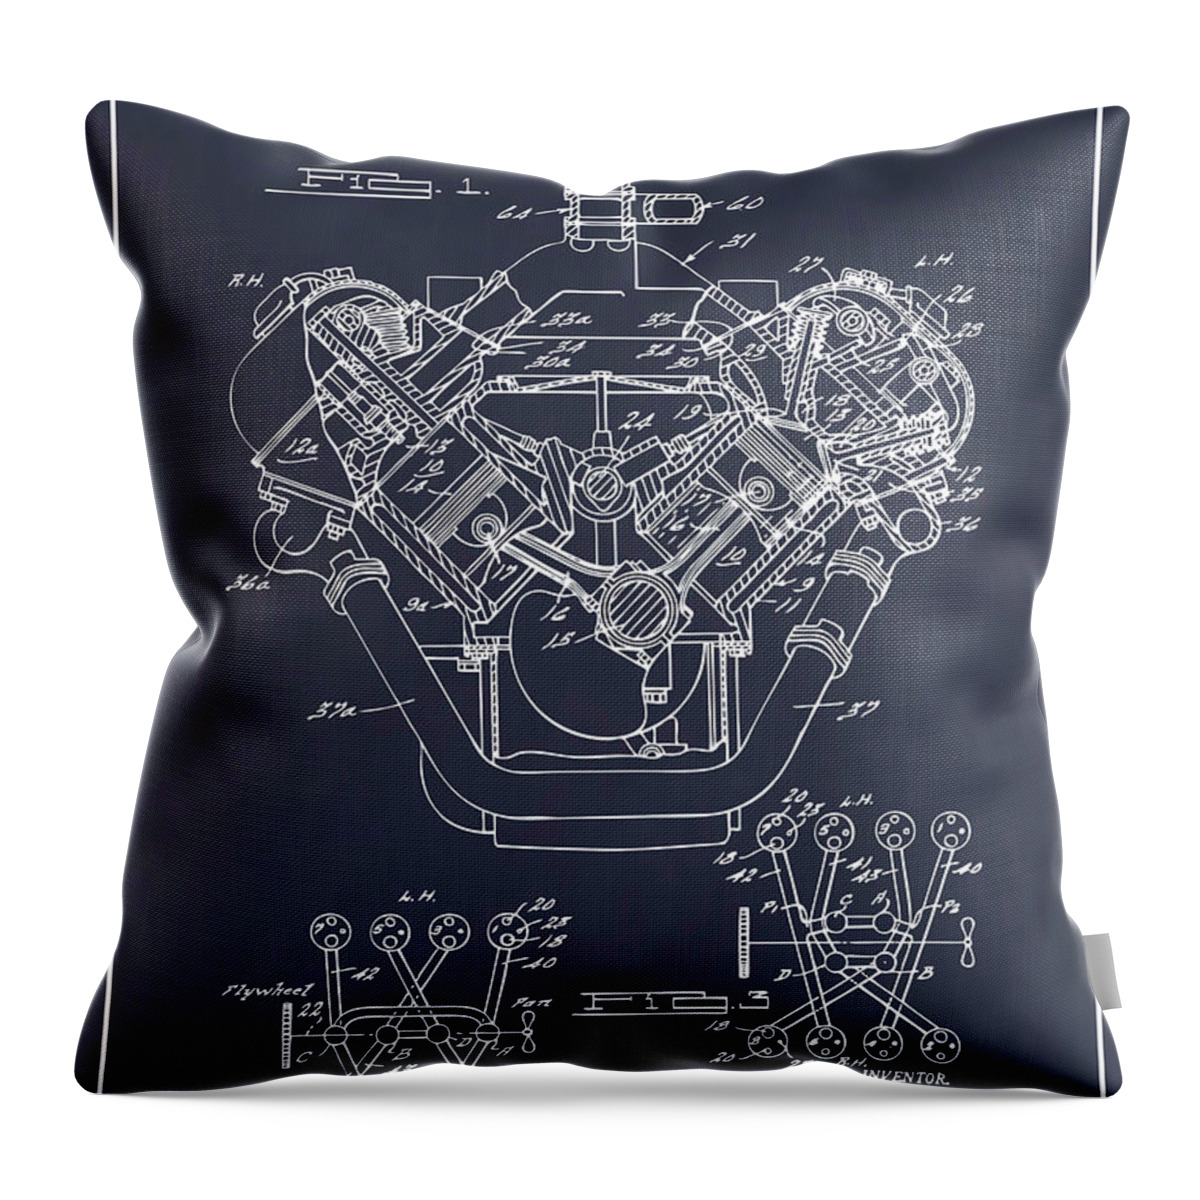 1954 Chrysler 426 Hemi V8 Engine Antique Paper Patent Print Throw Pillow featuring the drawing 1954 Chrysler 426 Hemi V8 Engine Blackboard Patent Print by Greg Edwards